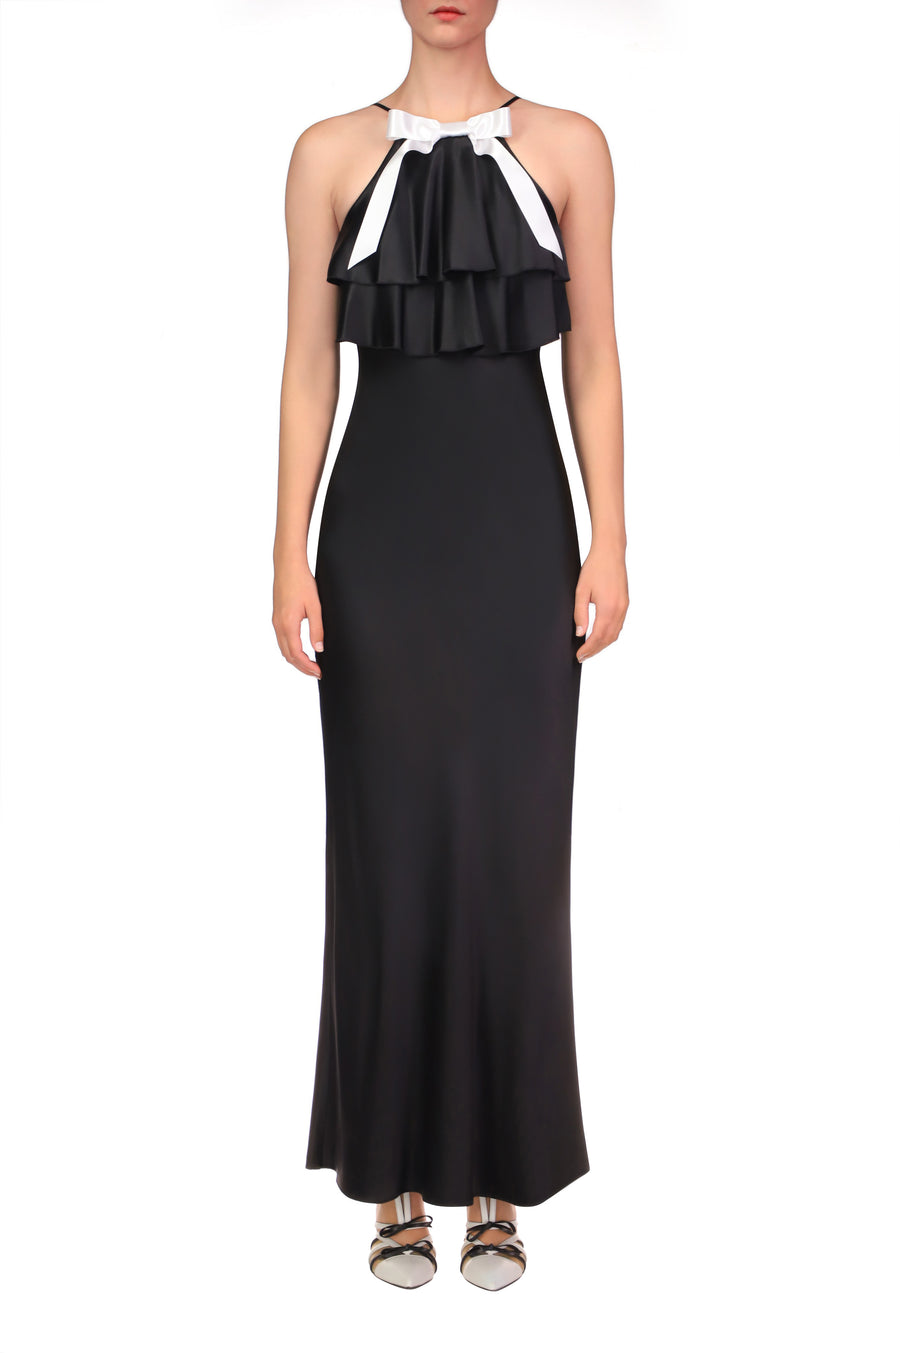 Black Charmeuse Bias Tiered Ruffle Halter Dress With White Bow Detail